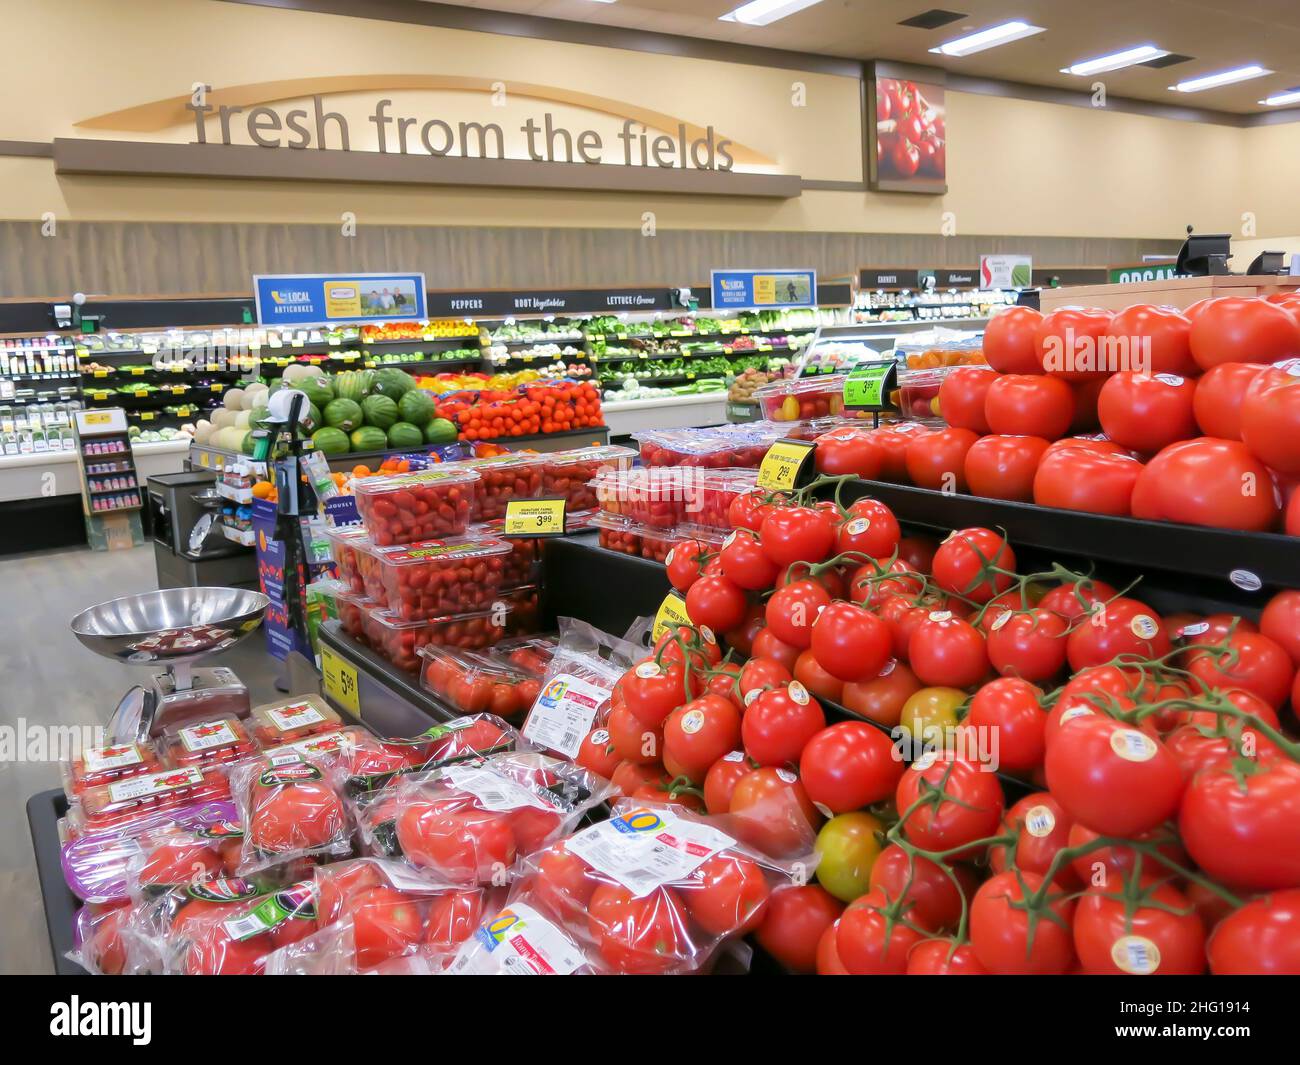 Produce Section of Grocery Store Stock Photo